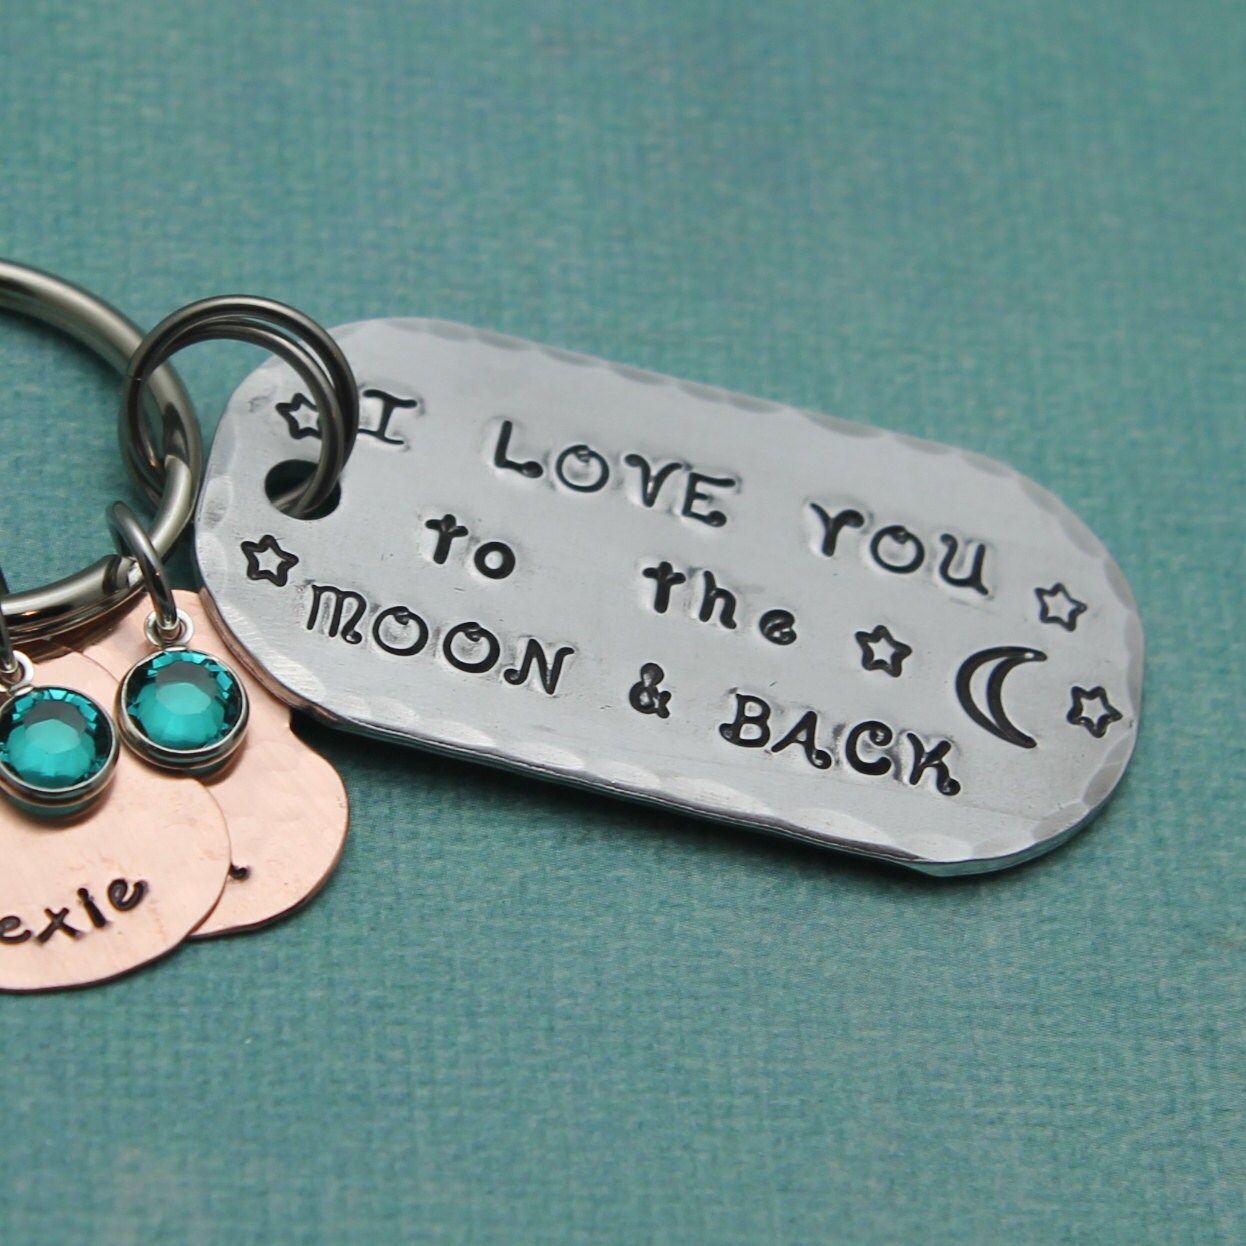 I LOVE you to the MOON and Back Key Chain Hand Stamped Personalized Aluminum and Copper Key Chain Hand Stamped Personalized Key Chain